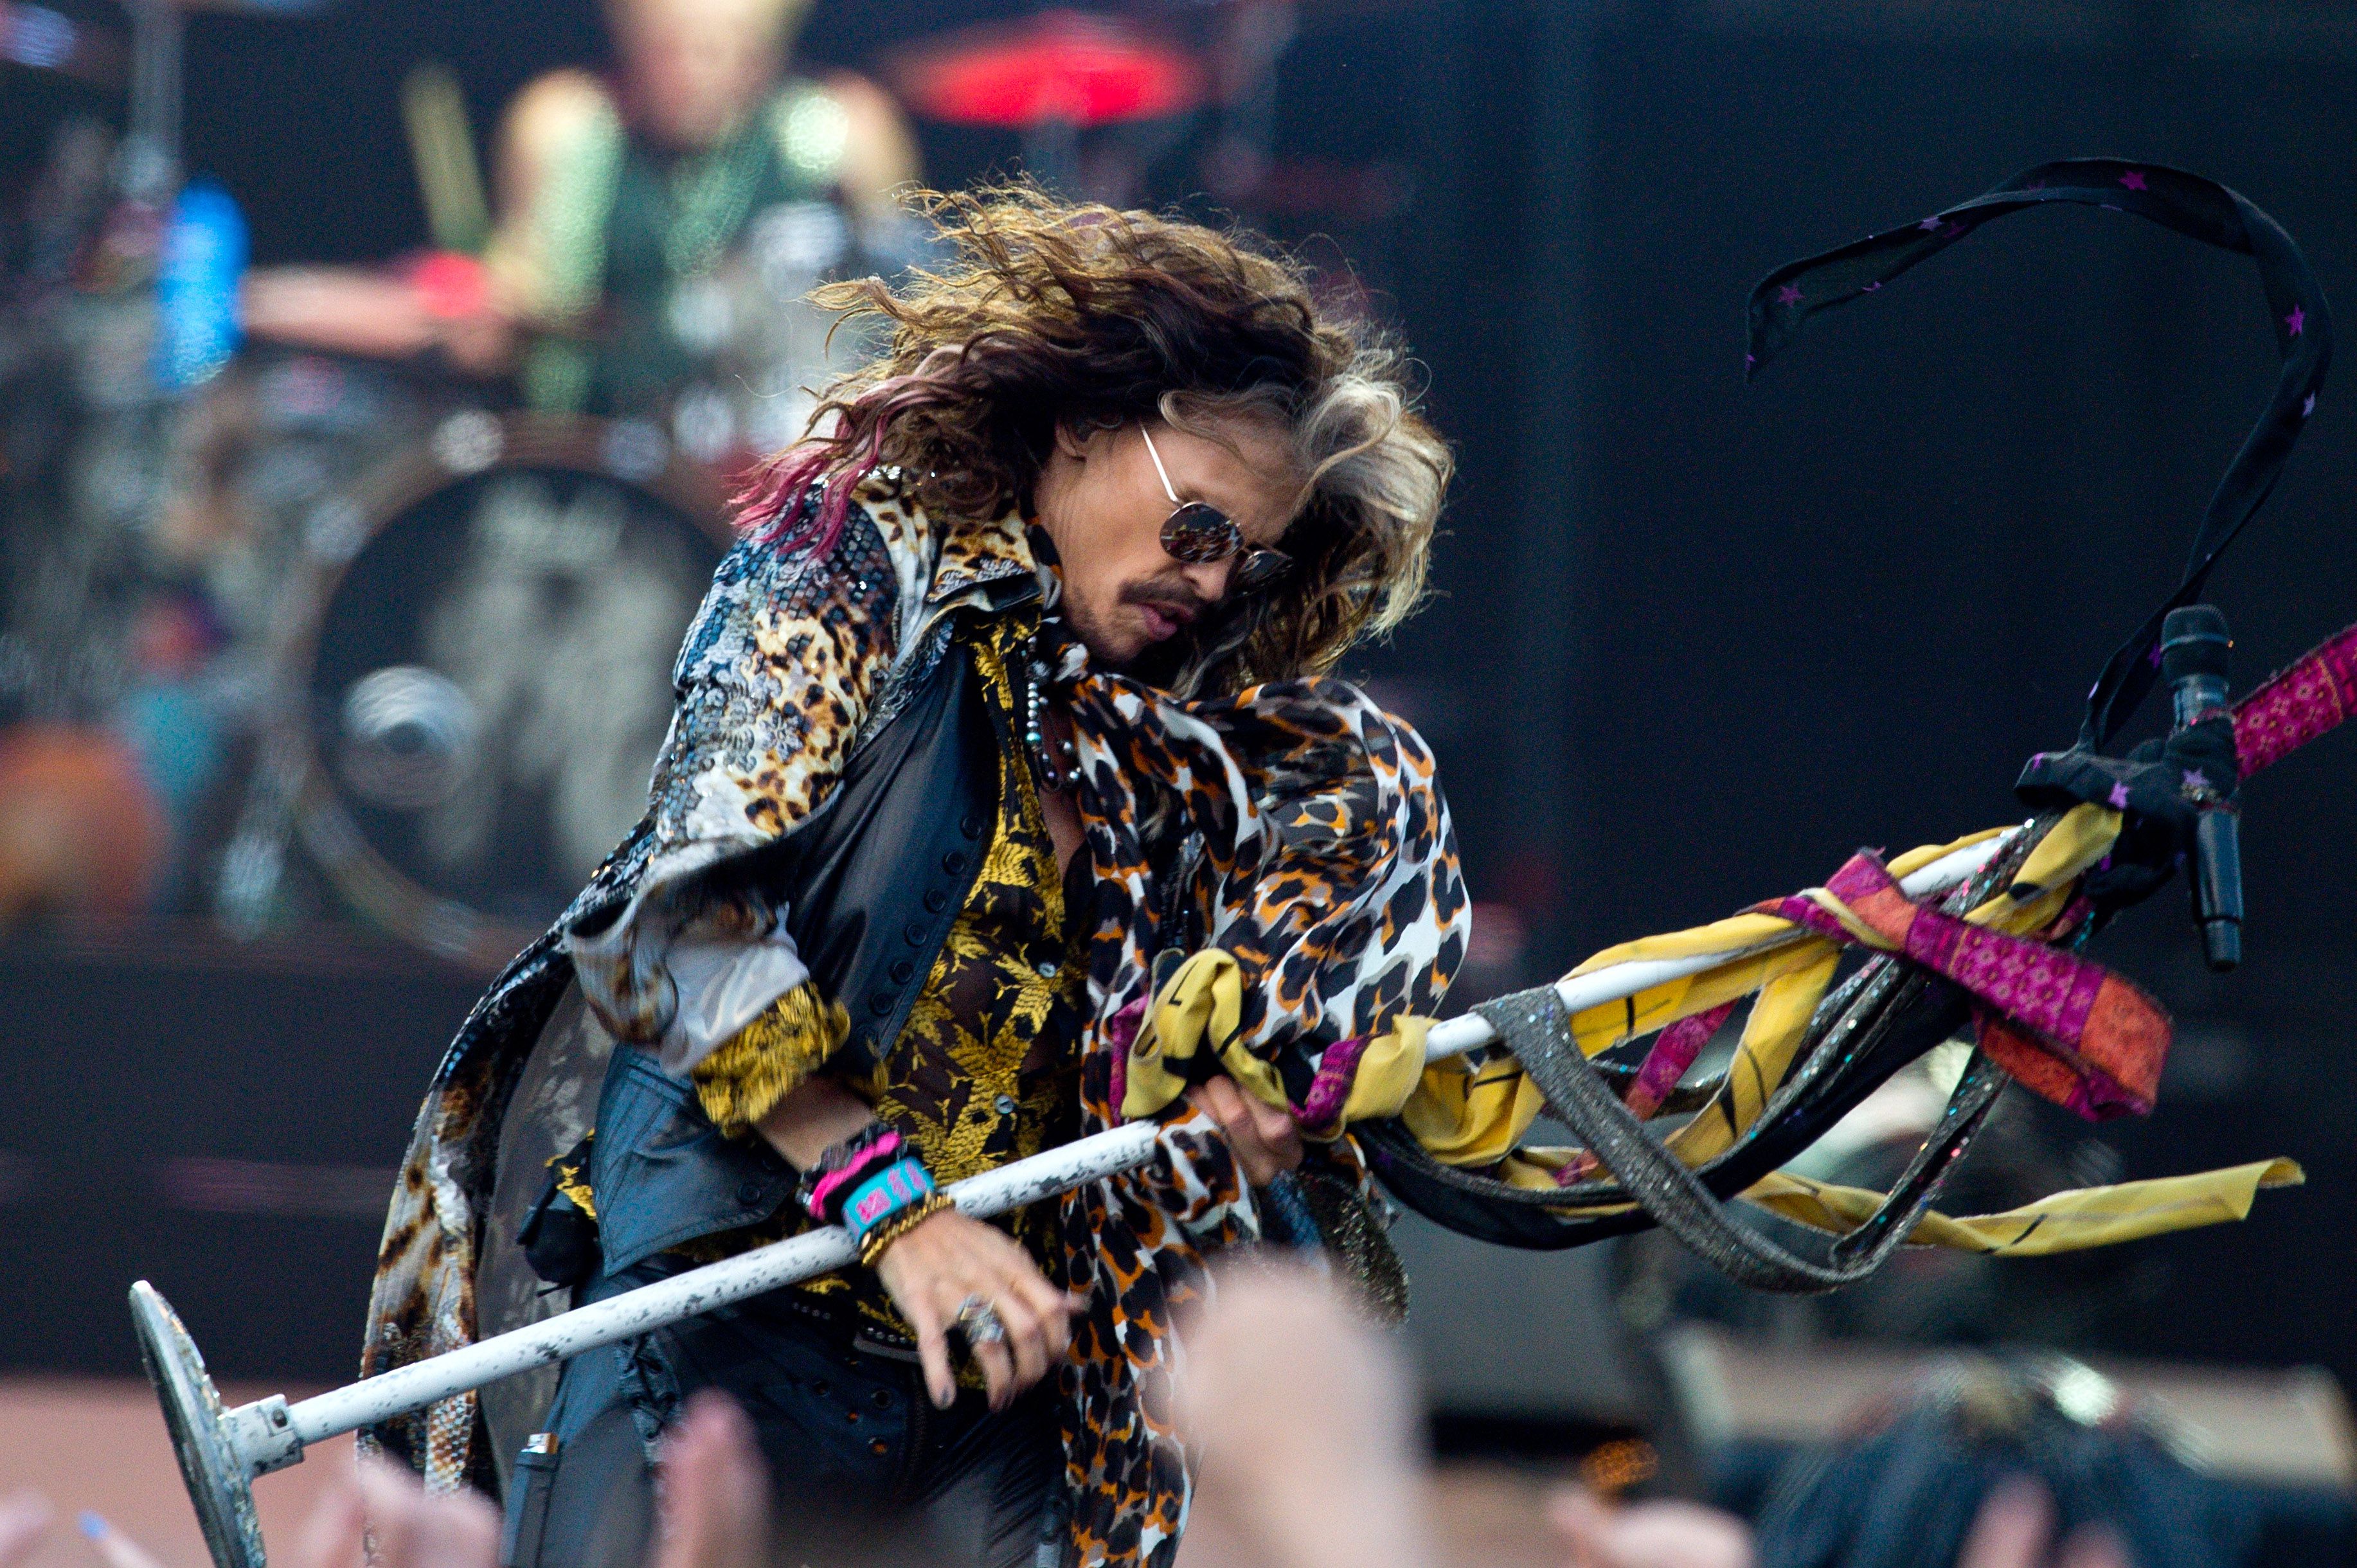 LONDON, ENGLAND - JUNE 28: Steven Tyler of Aerosmith performs on Day 1 of the Calling Festival at Clapham Common on June 28, 2014 in London, England. (Photo by Ben A. Pruchnie/Getty Images)